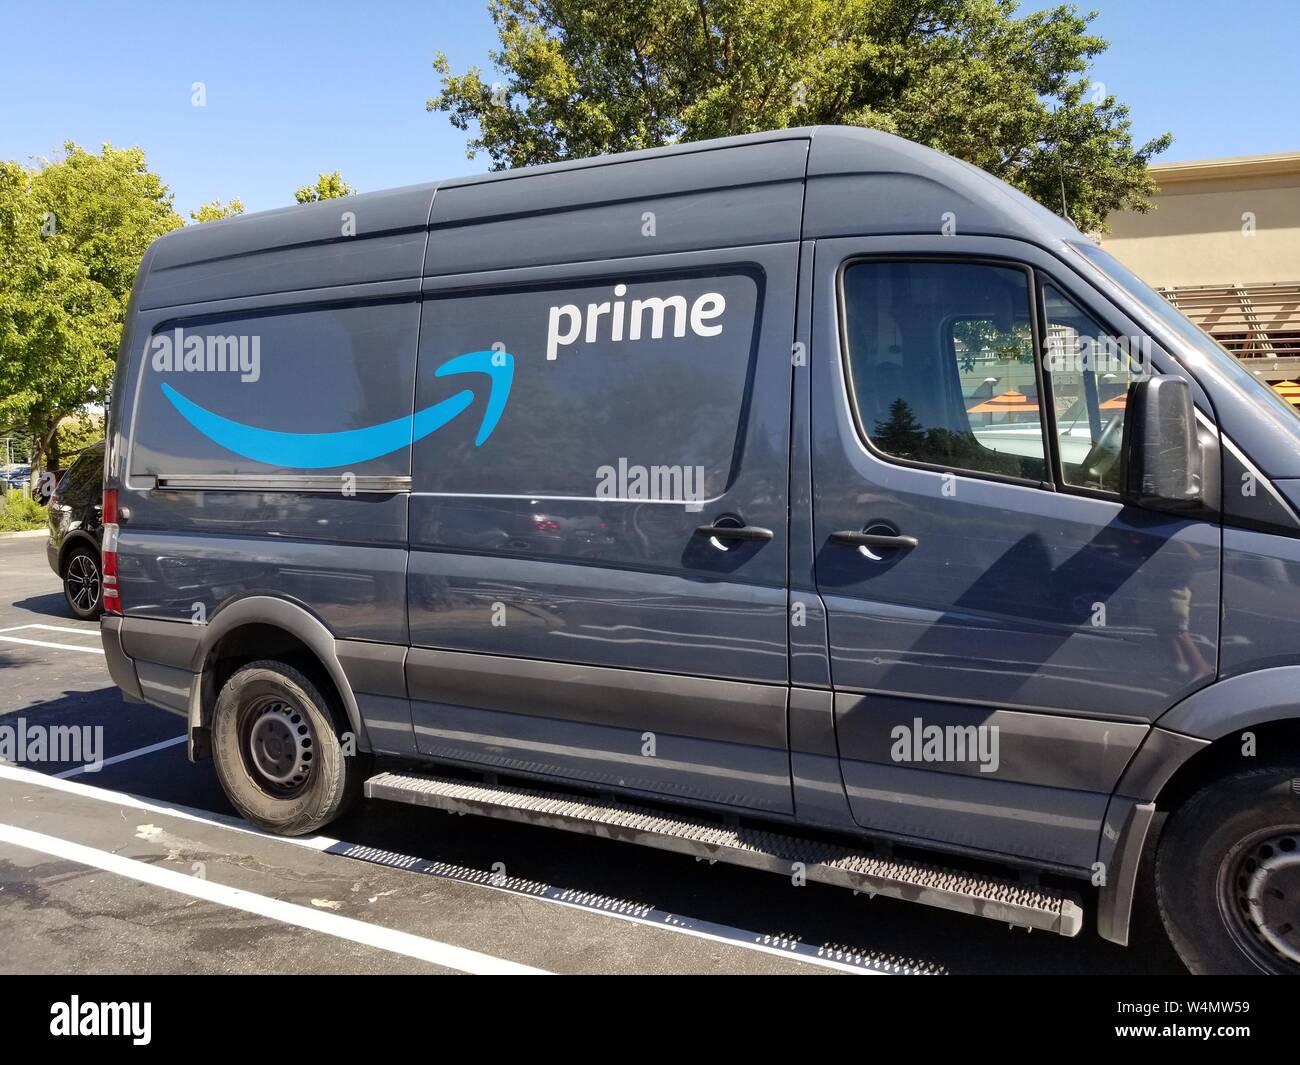 Close-up of logo for Amazon Prime service on the side of a branded delivery  truck in San Ramon, California; Amazon announced that it would hire  thousands more delivery drivers to increase 1